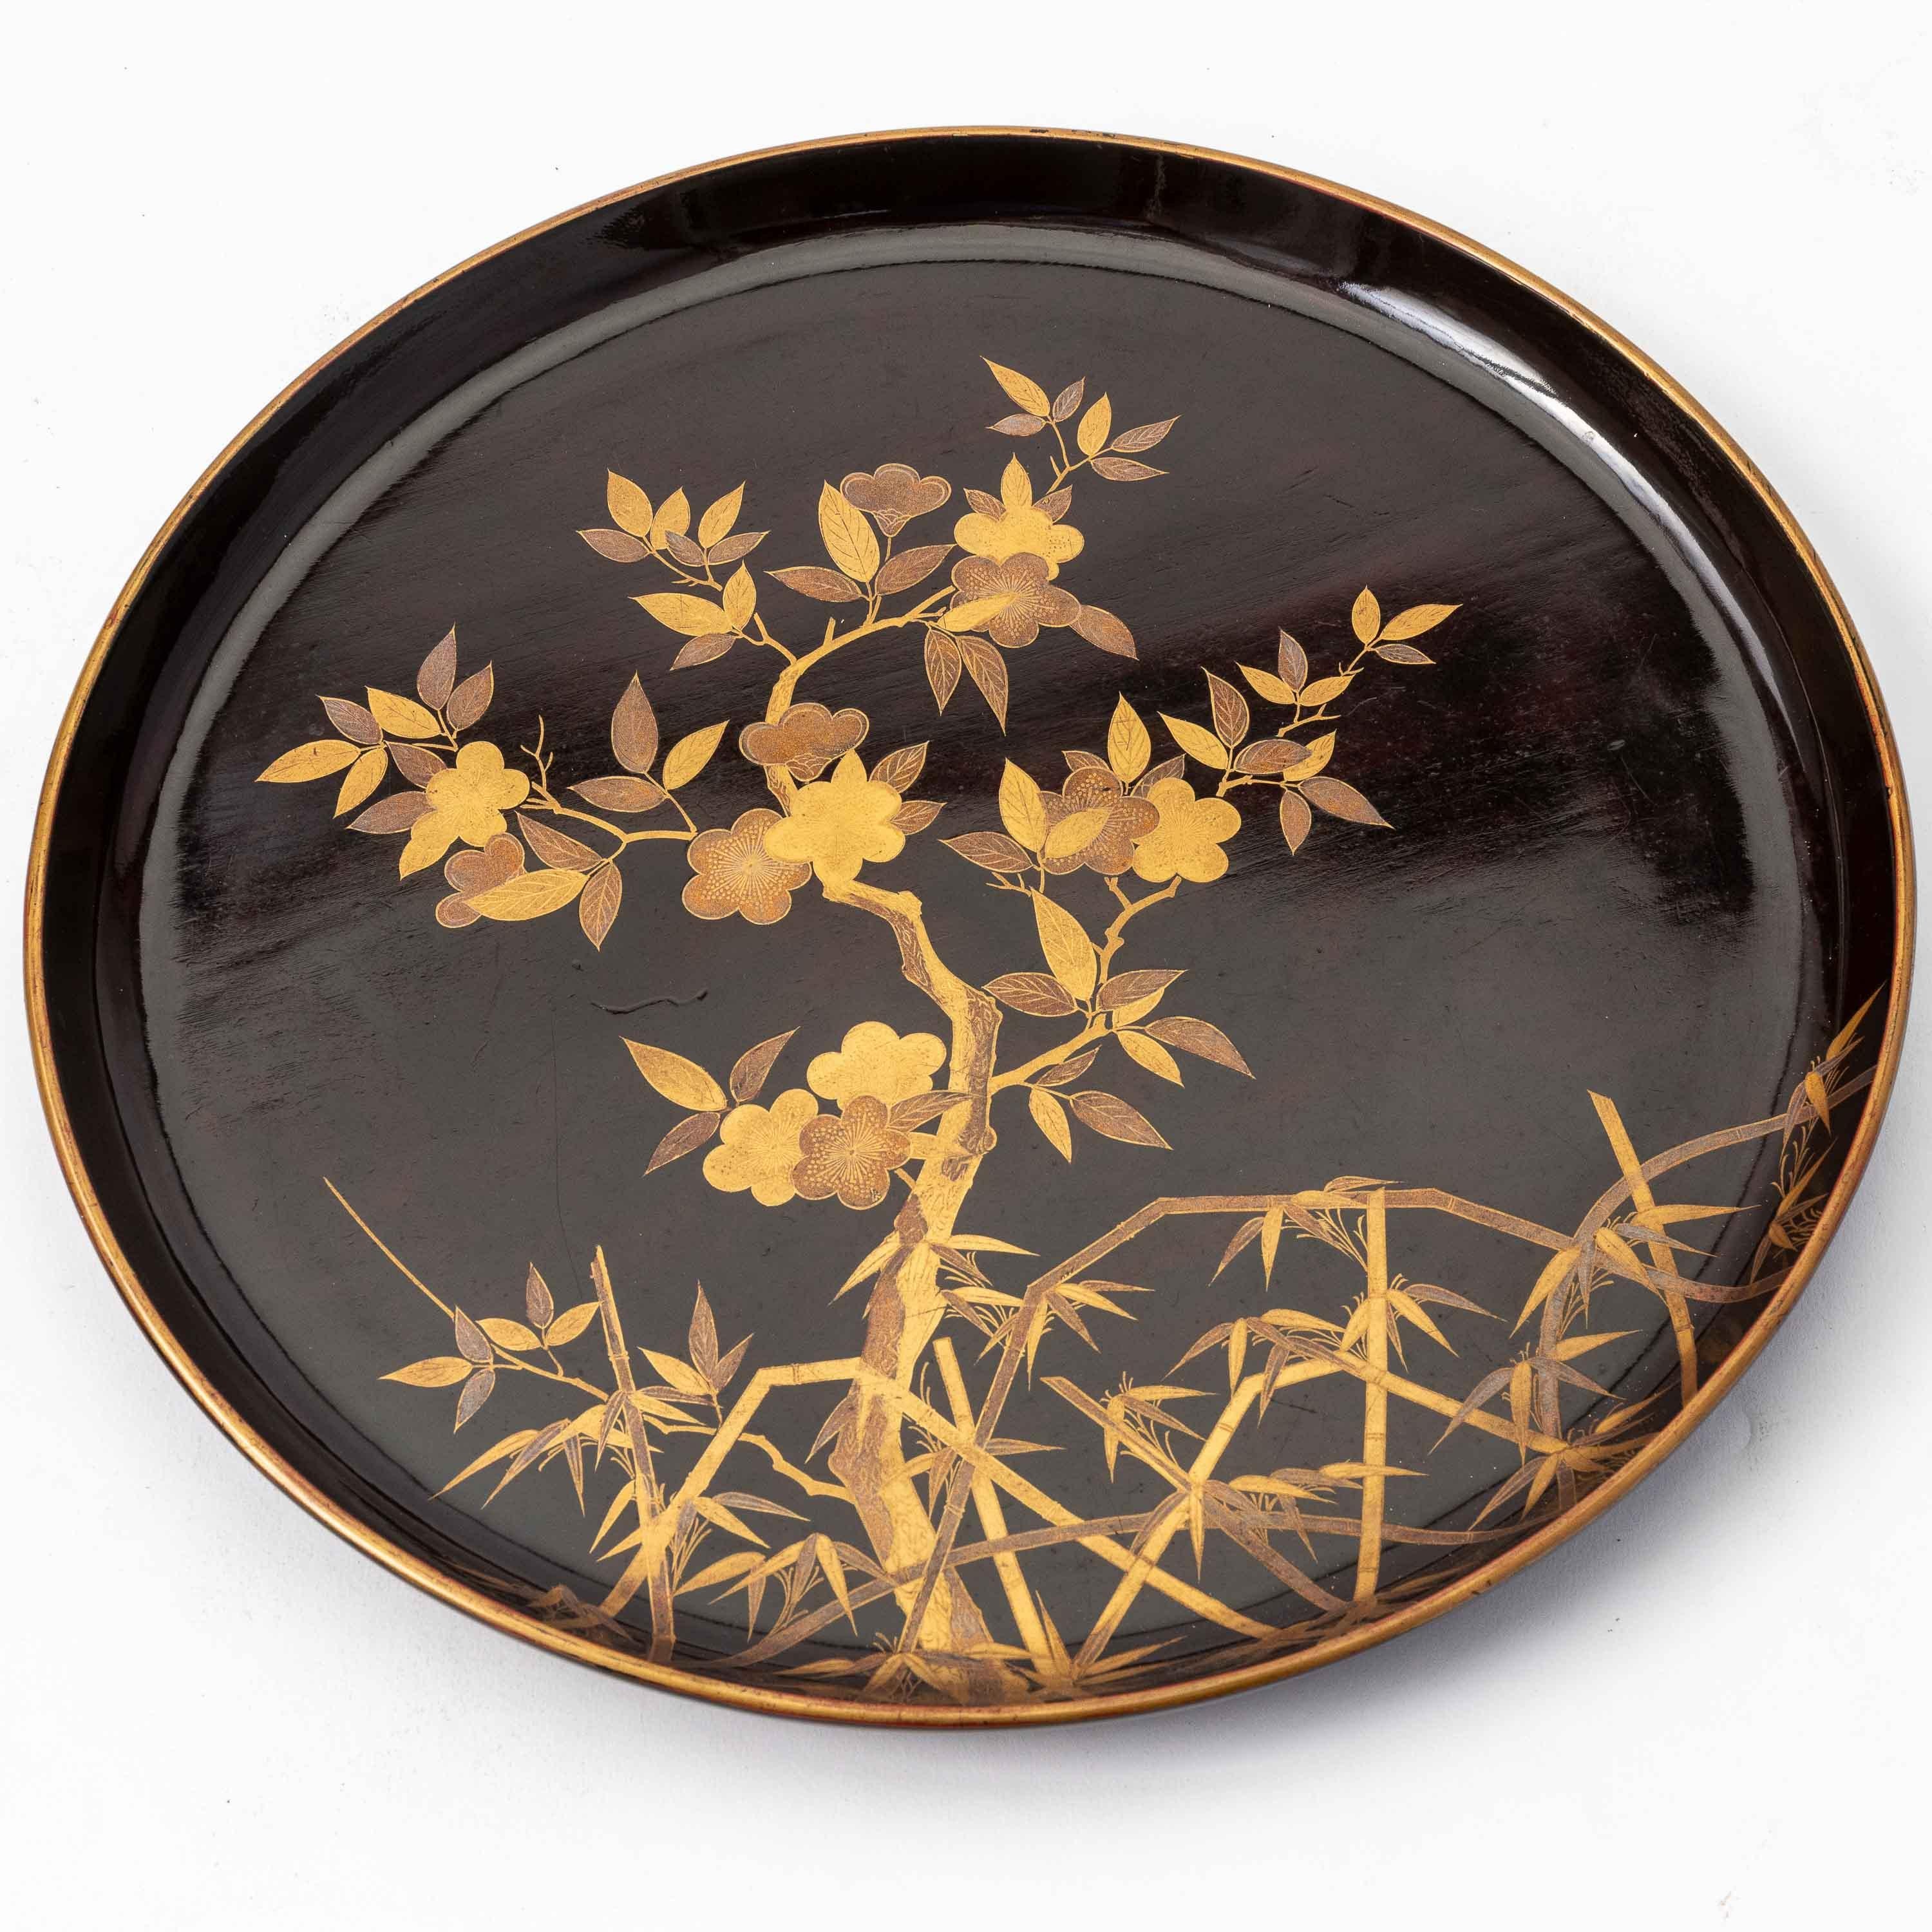 18th Century Set of 9 Antique Japanese Circular Lacquer Trays with Botanical Designs in Gold